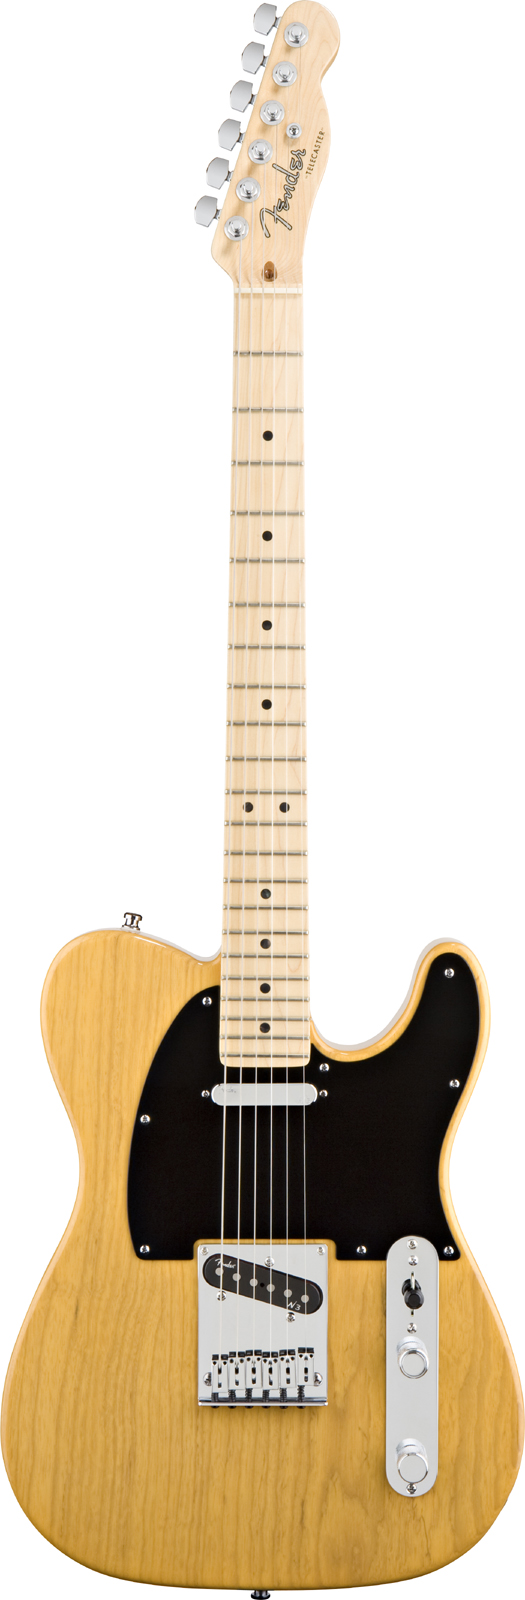 American Deluxe Telecaster Ash